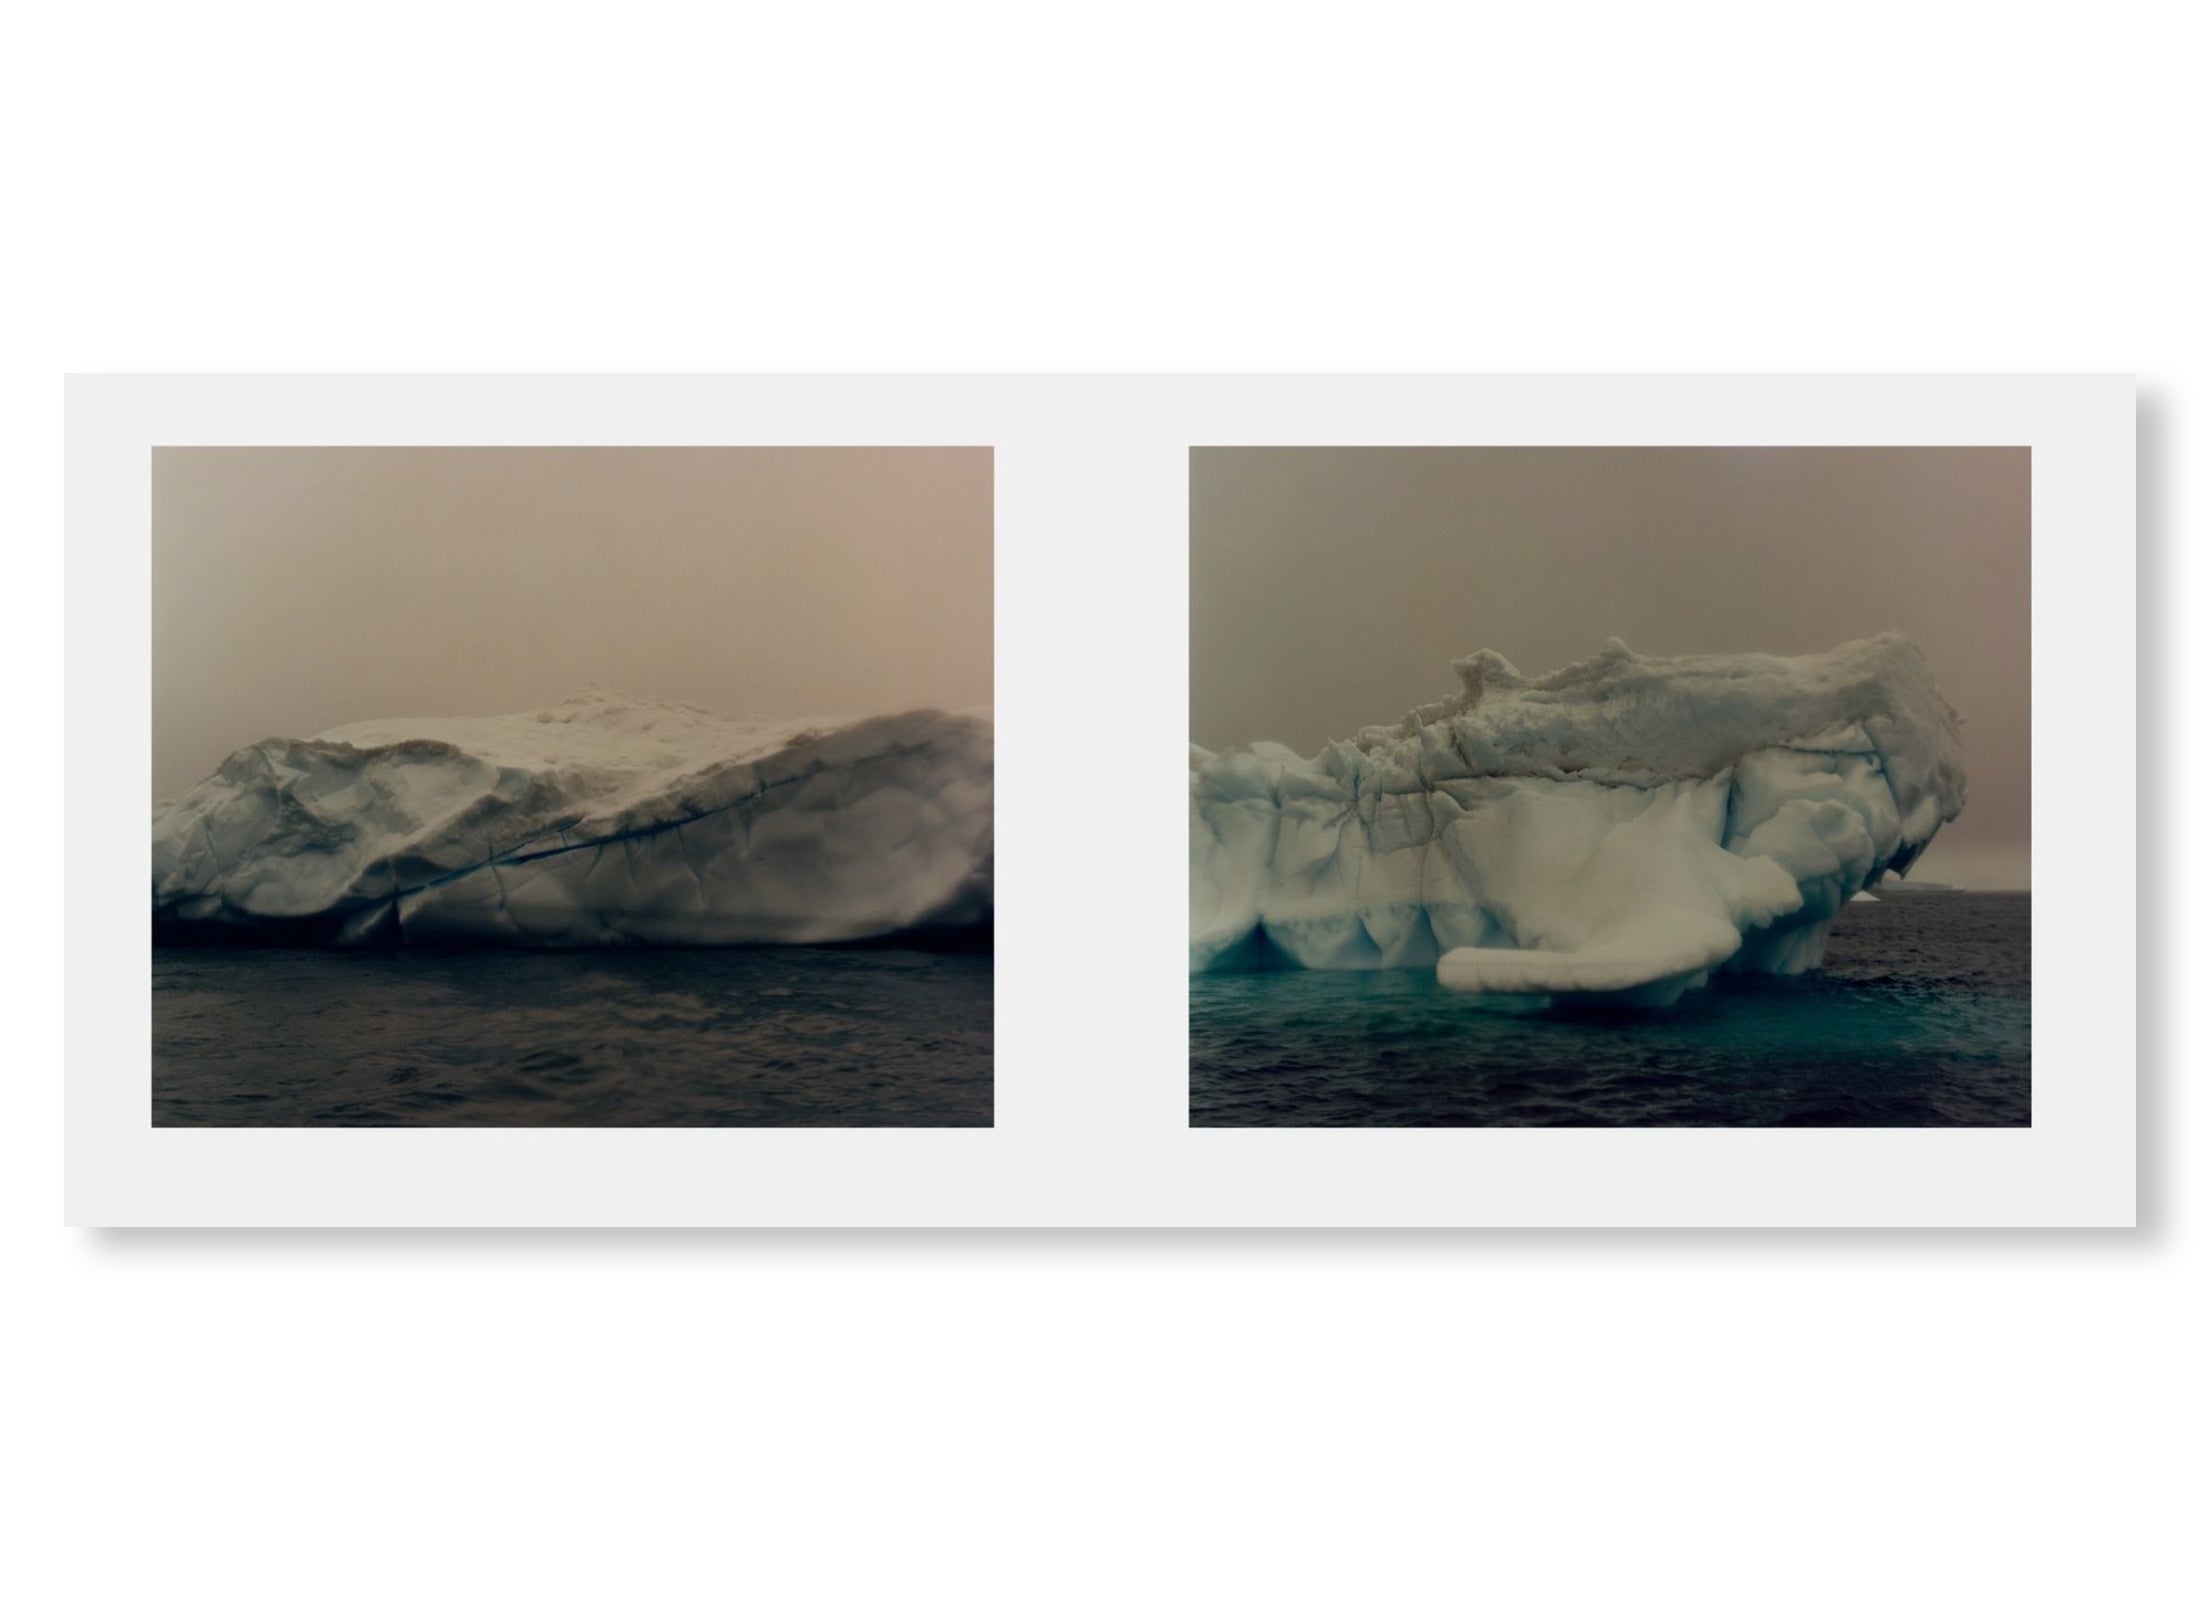 TO THE ANTARCTIC by Jamie Hawkesworth